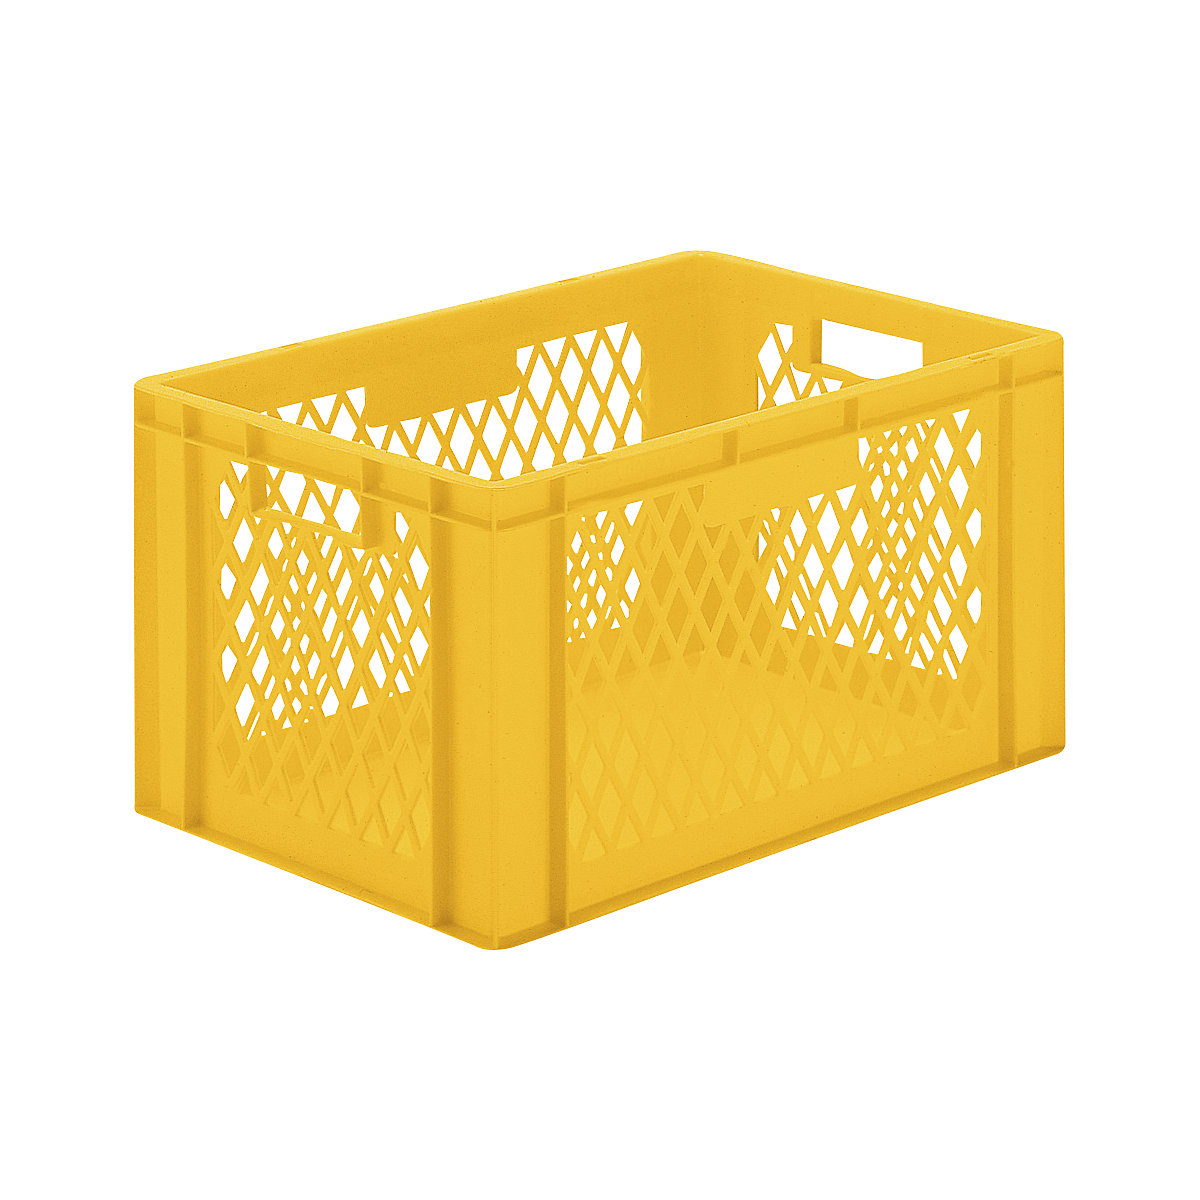 Euro stacking container, perforated walls, closed base, LxWxH 600 x 400 x 320 mm, yellow, pack of 5-6